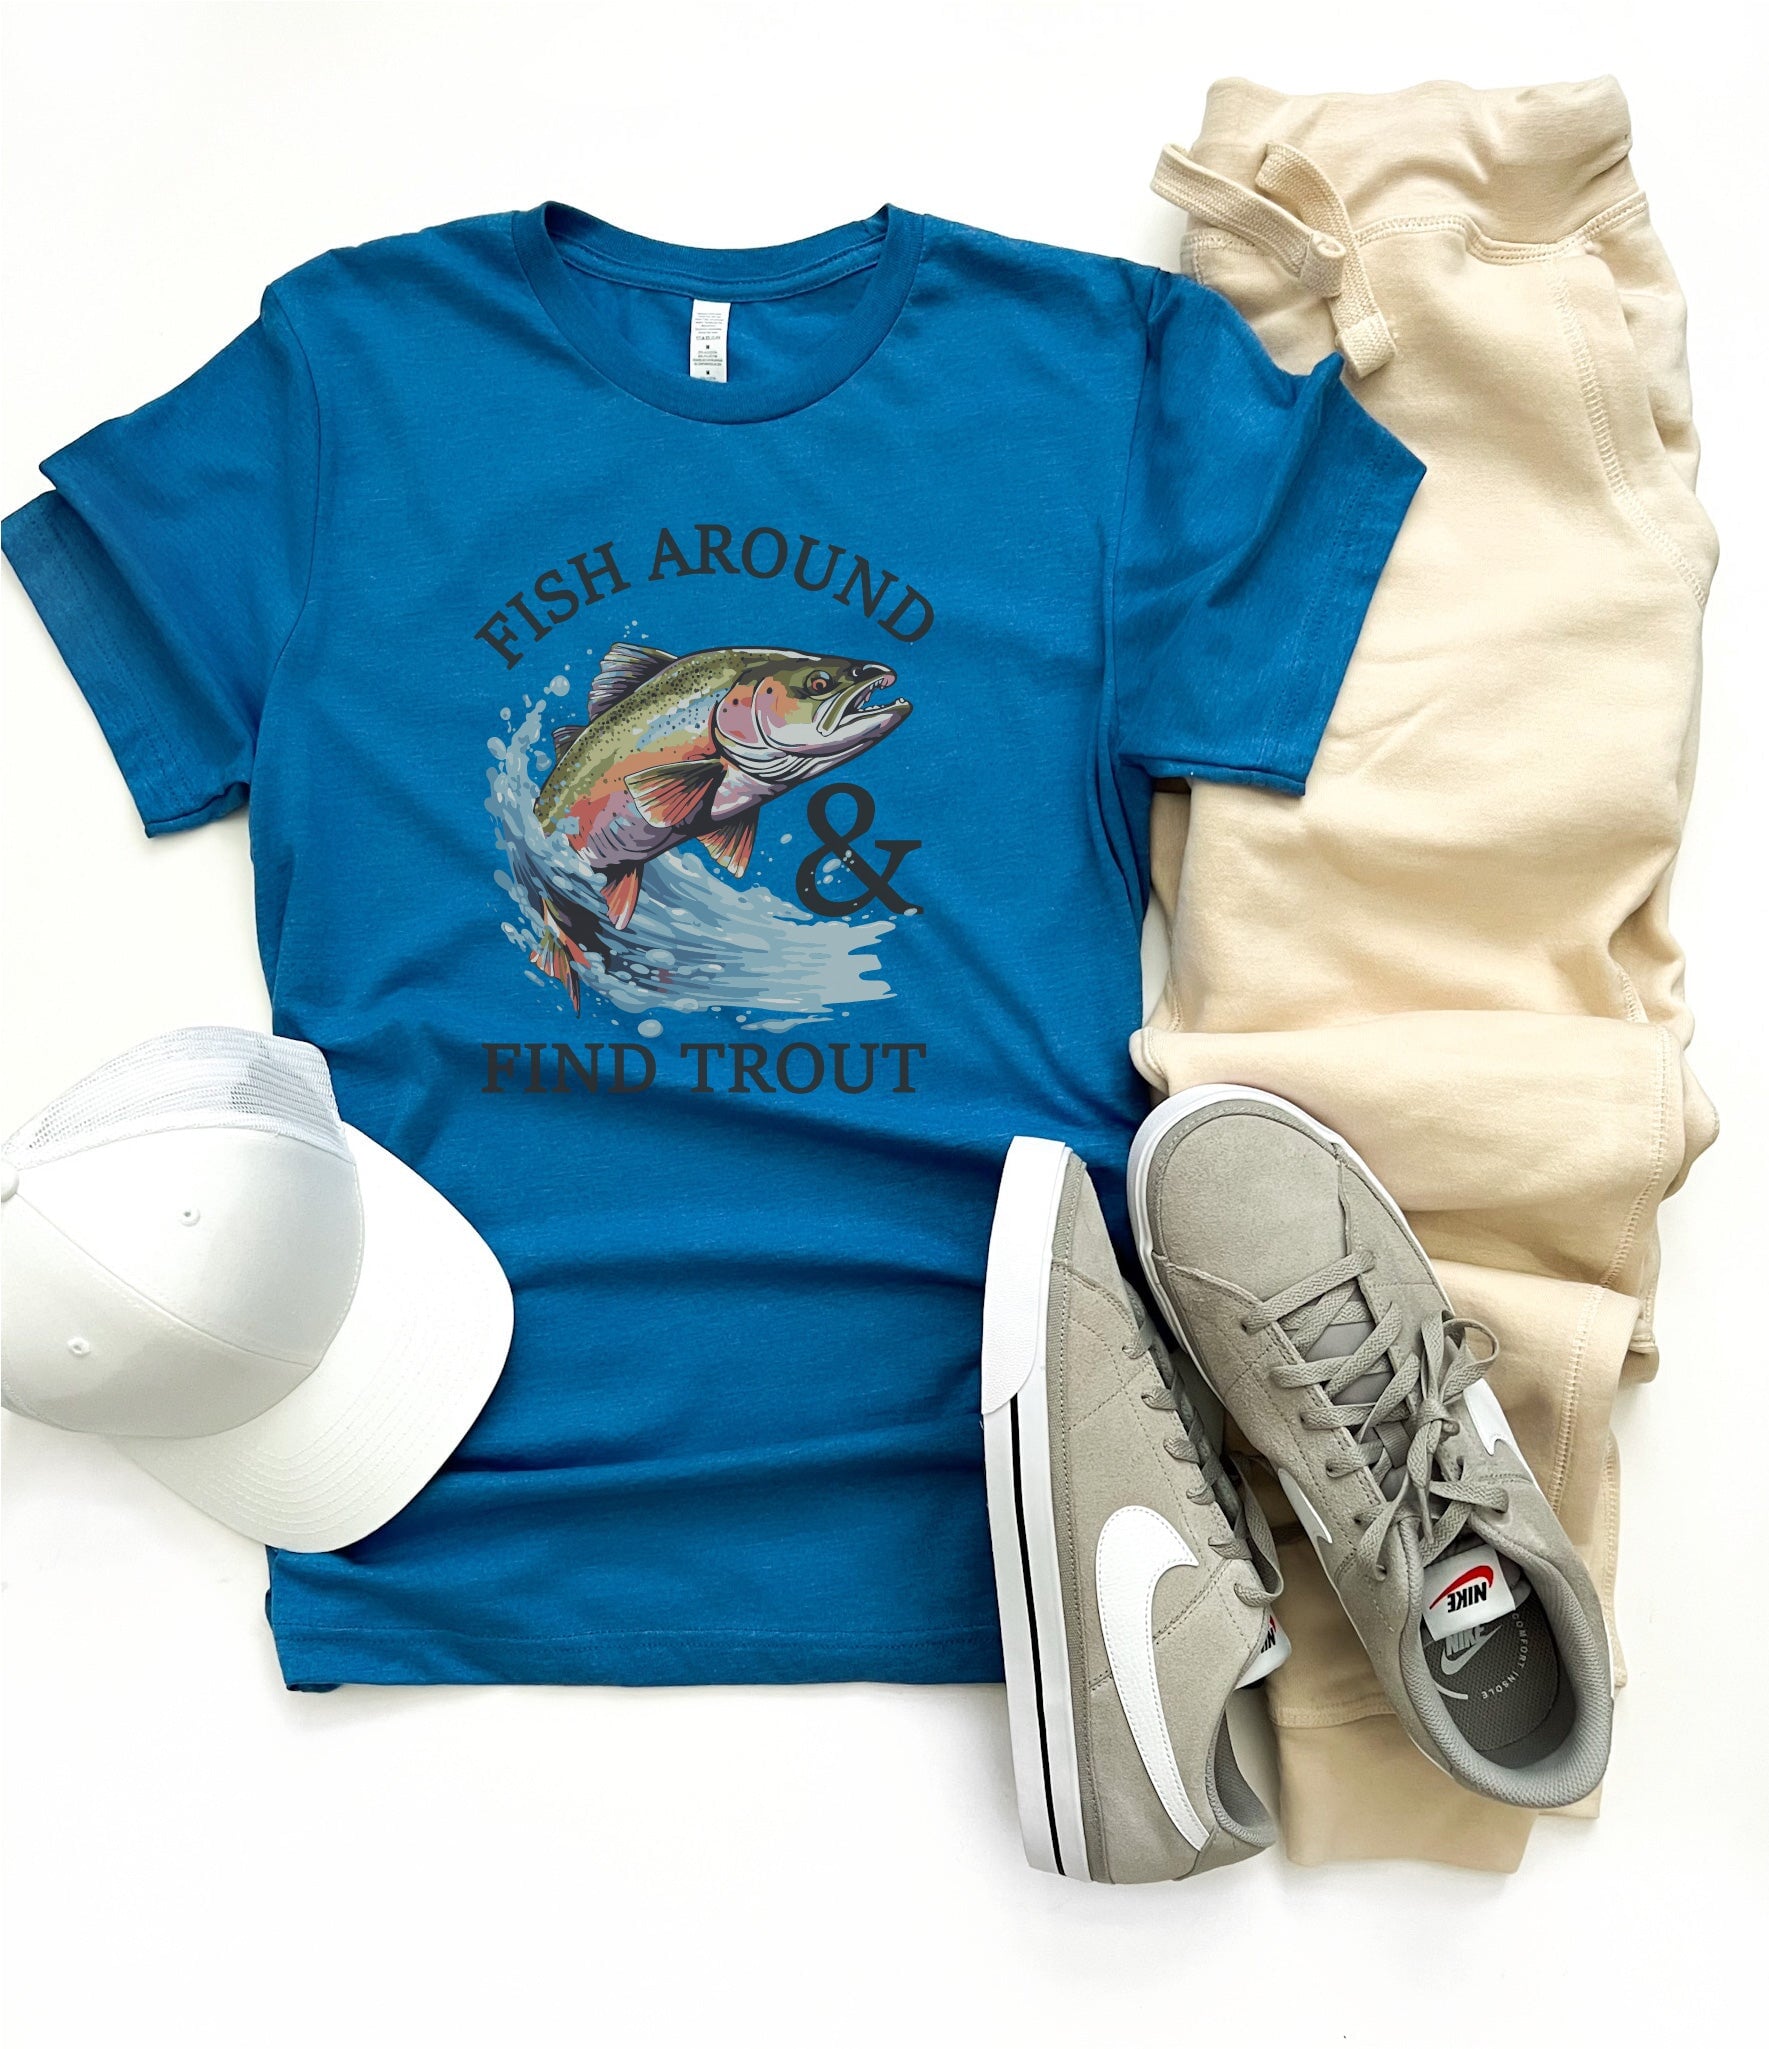 Fish around & find trout tee Short sleeve mens tee Bella canvas 3001 cool blue 